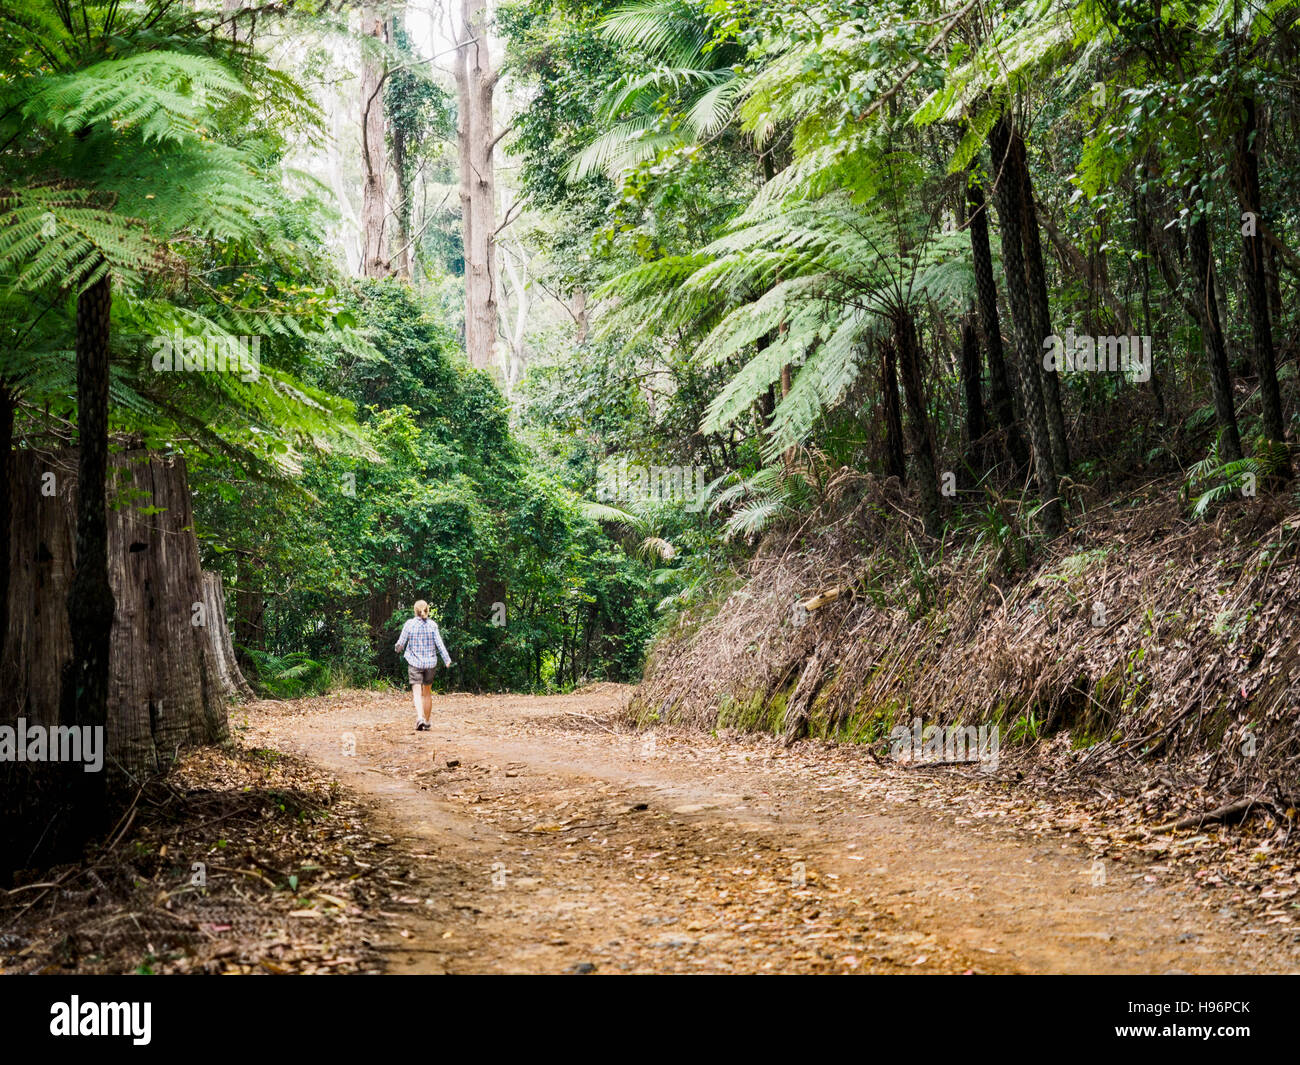 Australia, New South Wales, Port Macquarie, Mature woman walking along dirt road in forest Stock Photo